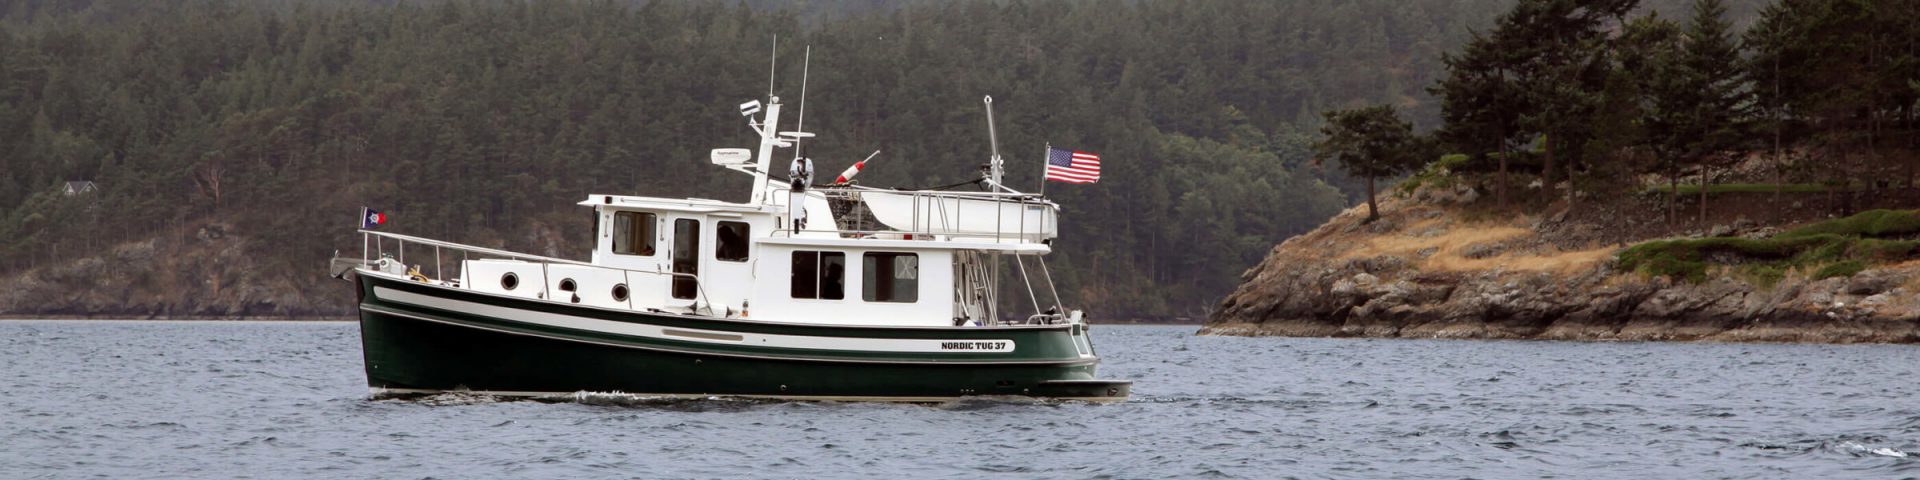 Exhibitor Search - Anacortes Boat and Yacht Show featuring Trawlerfest